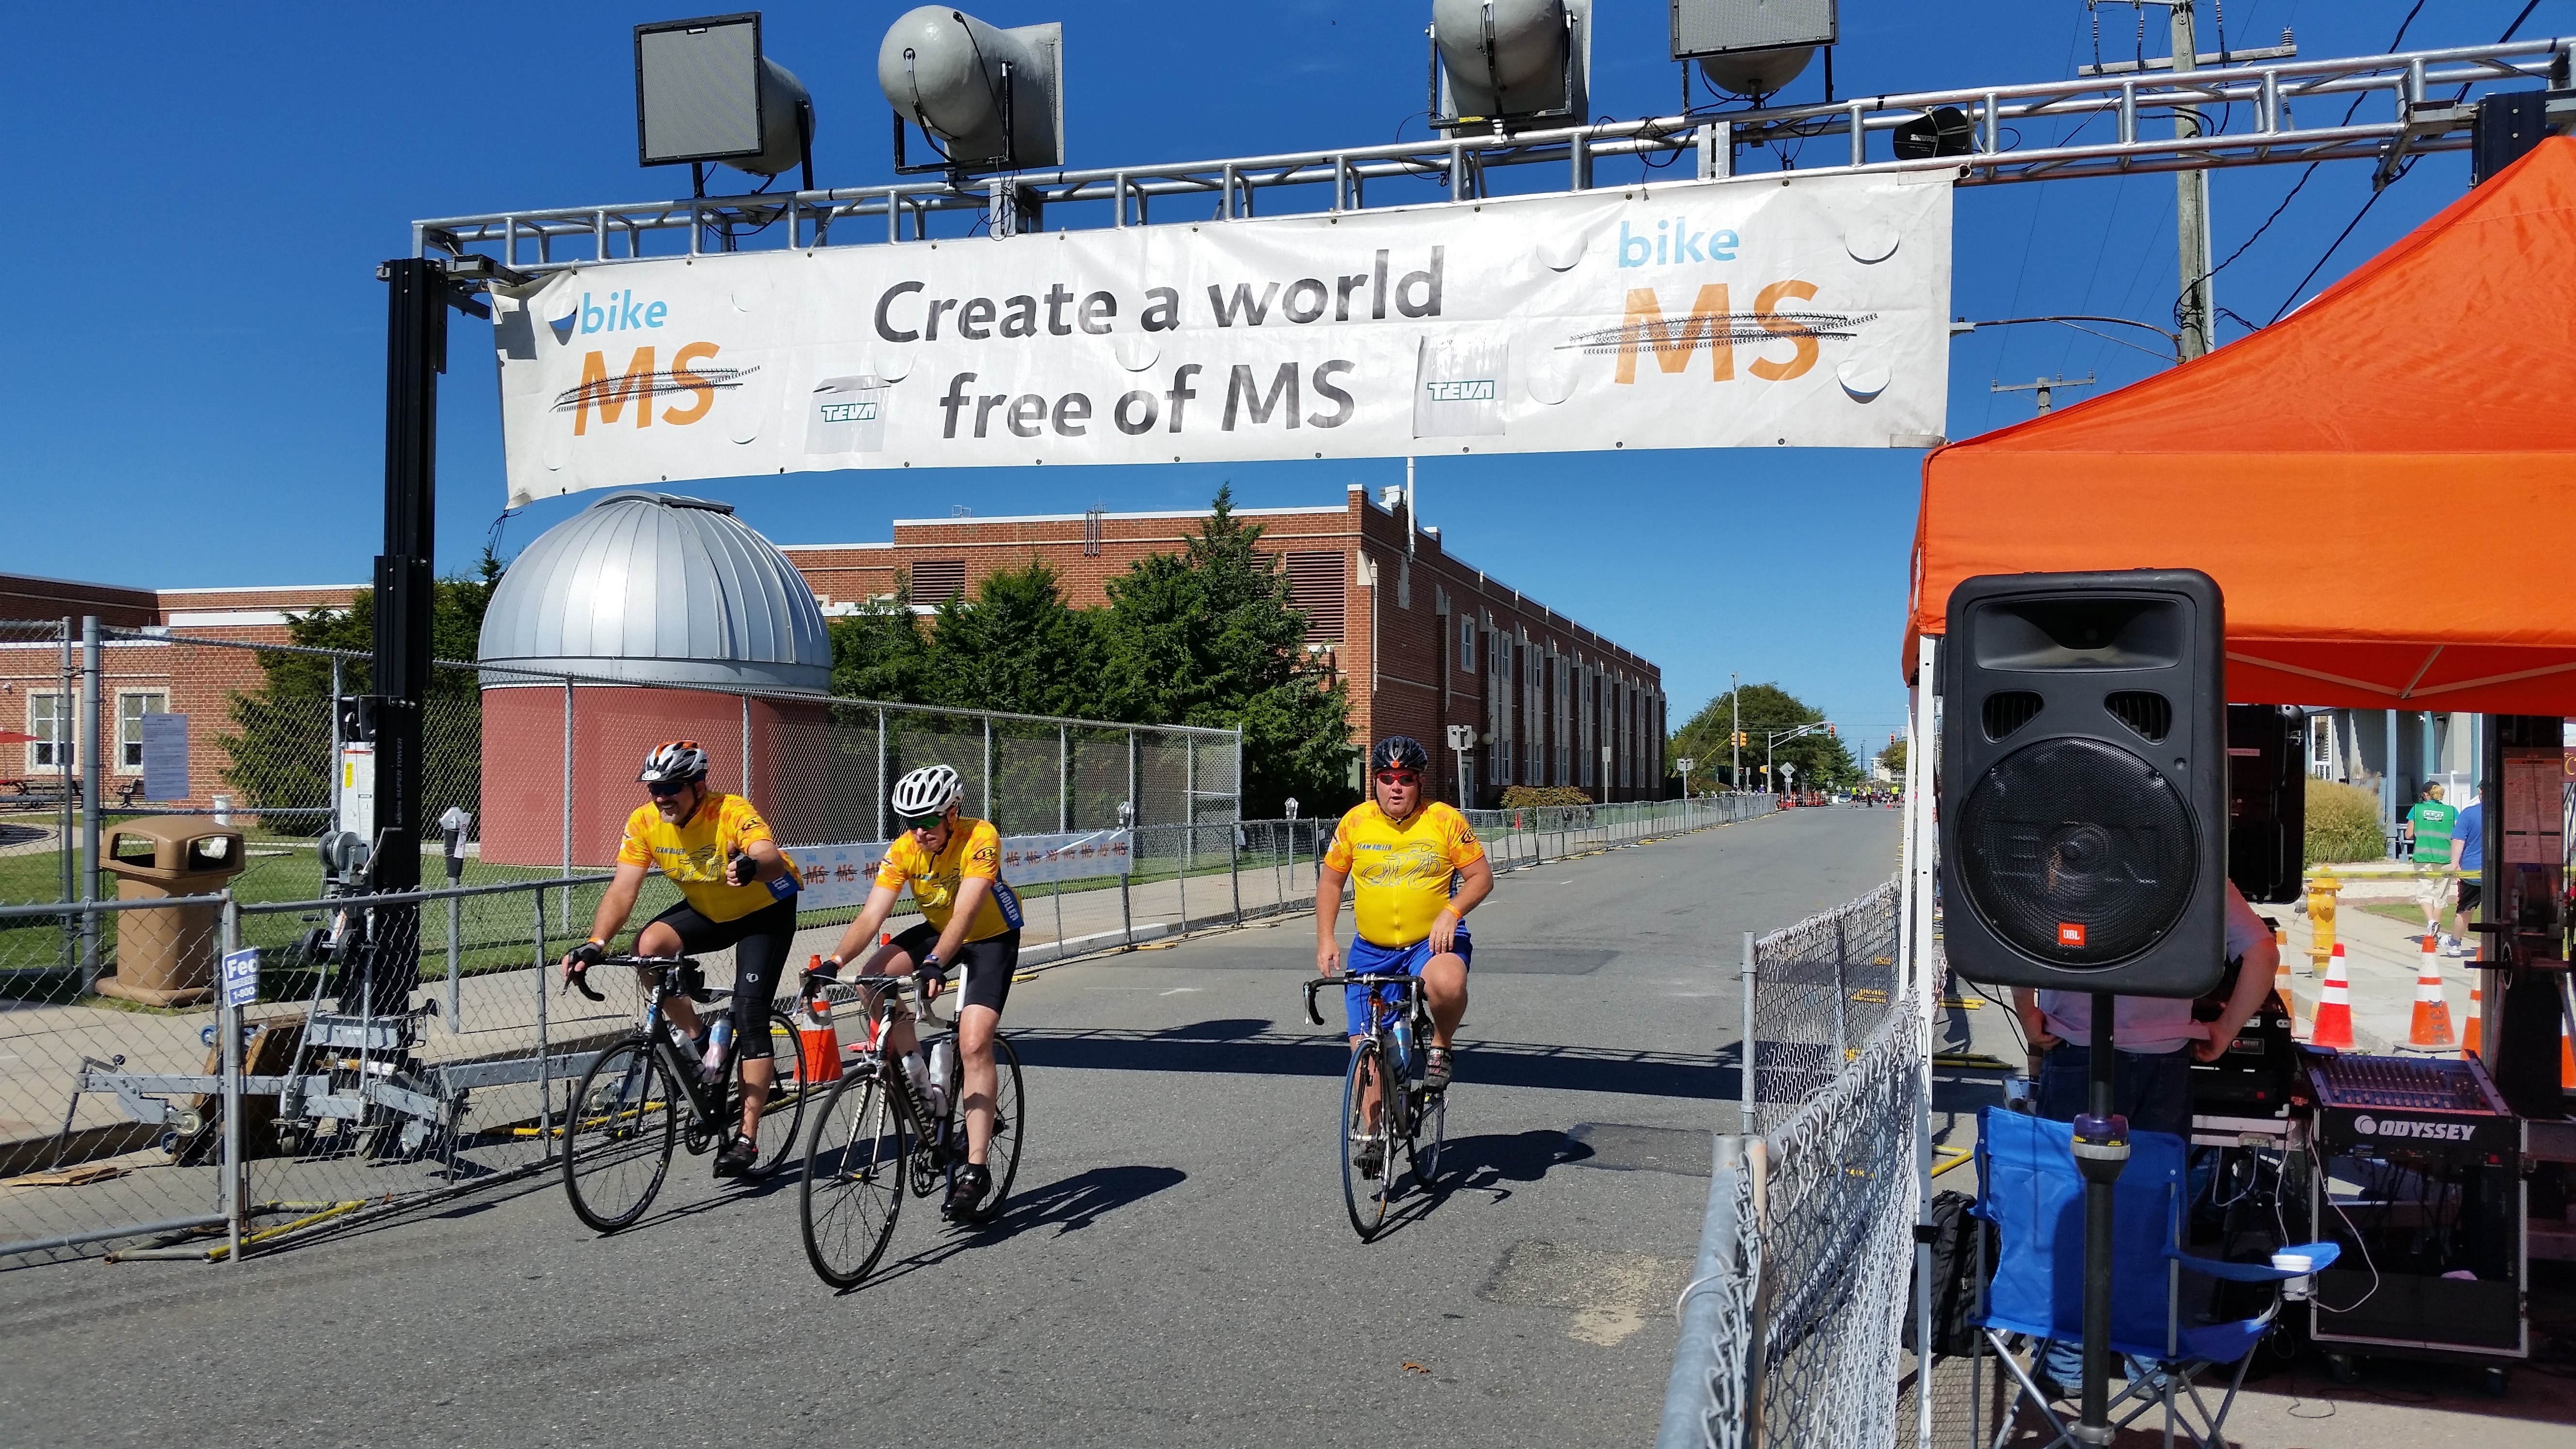 Cyclists Receive Warm Ocean City in MS Ride OCNJ Daily